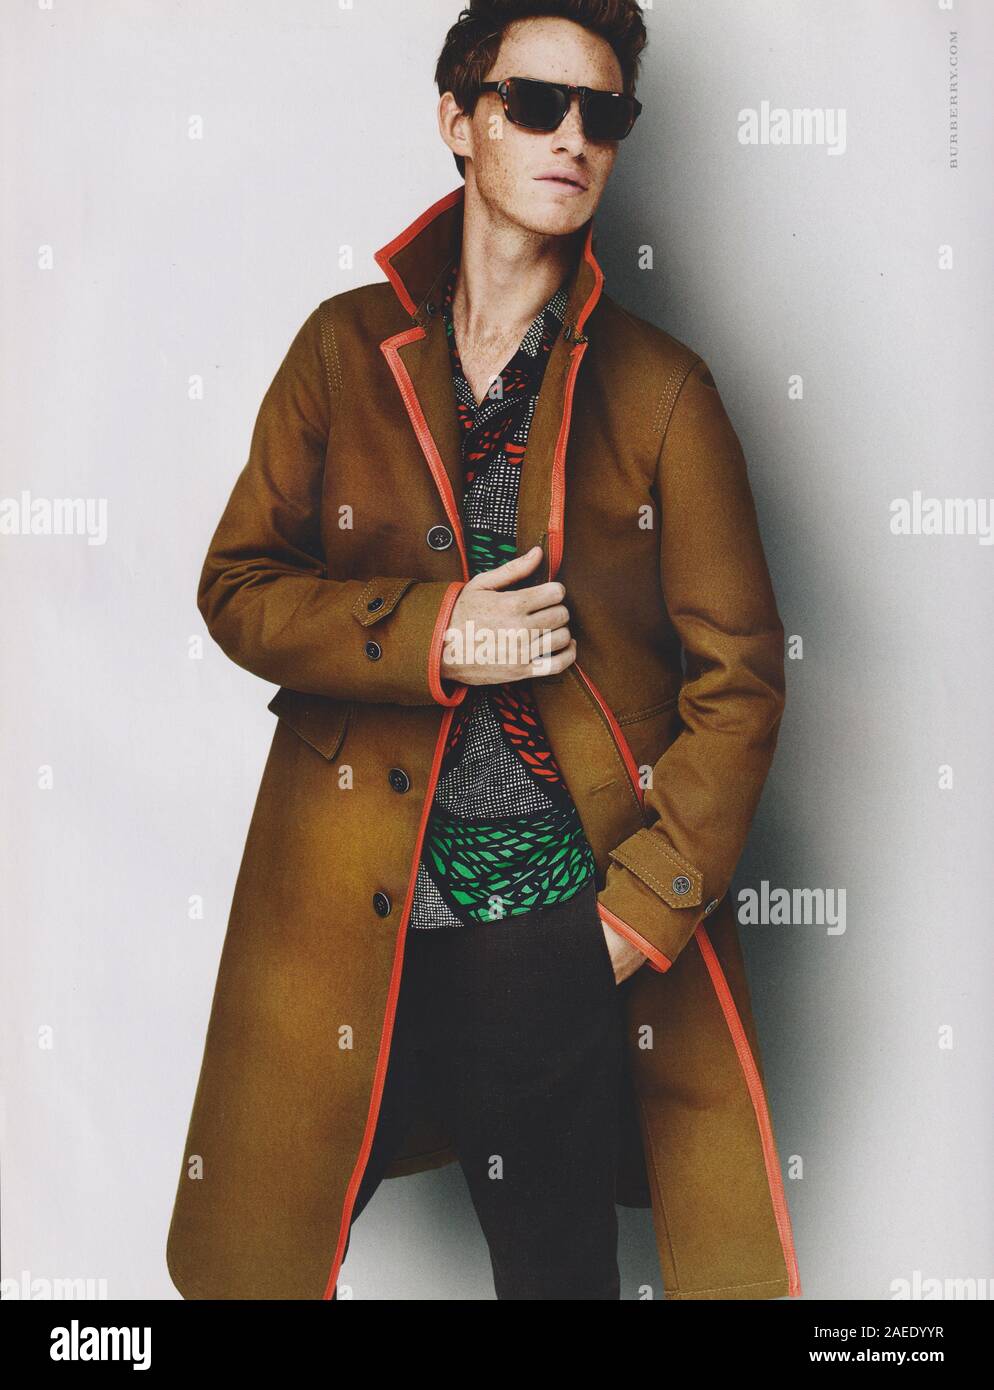 poster advertising Burberry fashion house with Eddie Redmayne in paper  magazine from 2012 year, advertisement, creative Burberry advert from 2010s  Stock Photo - Alamy